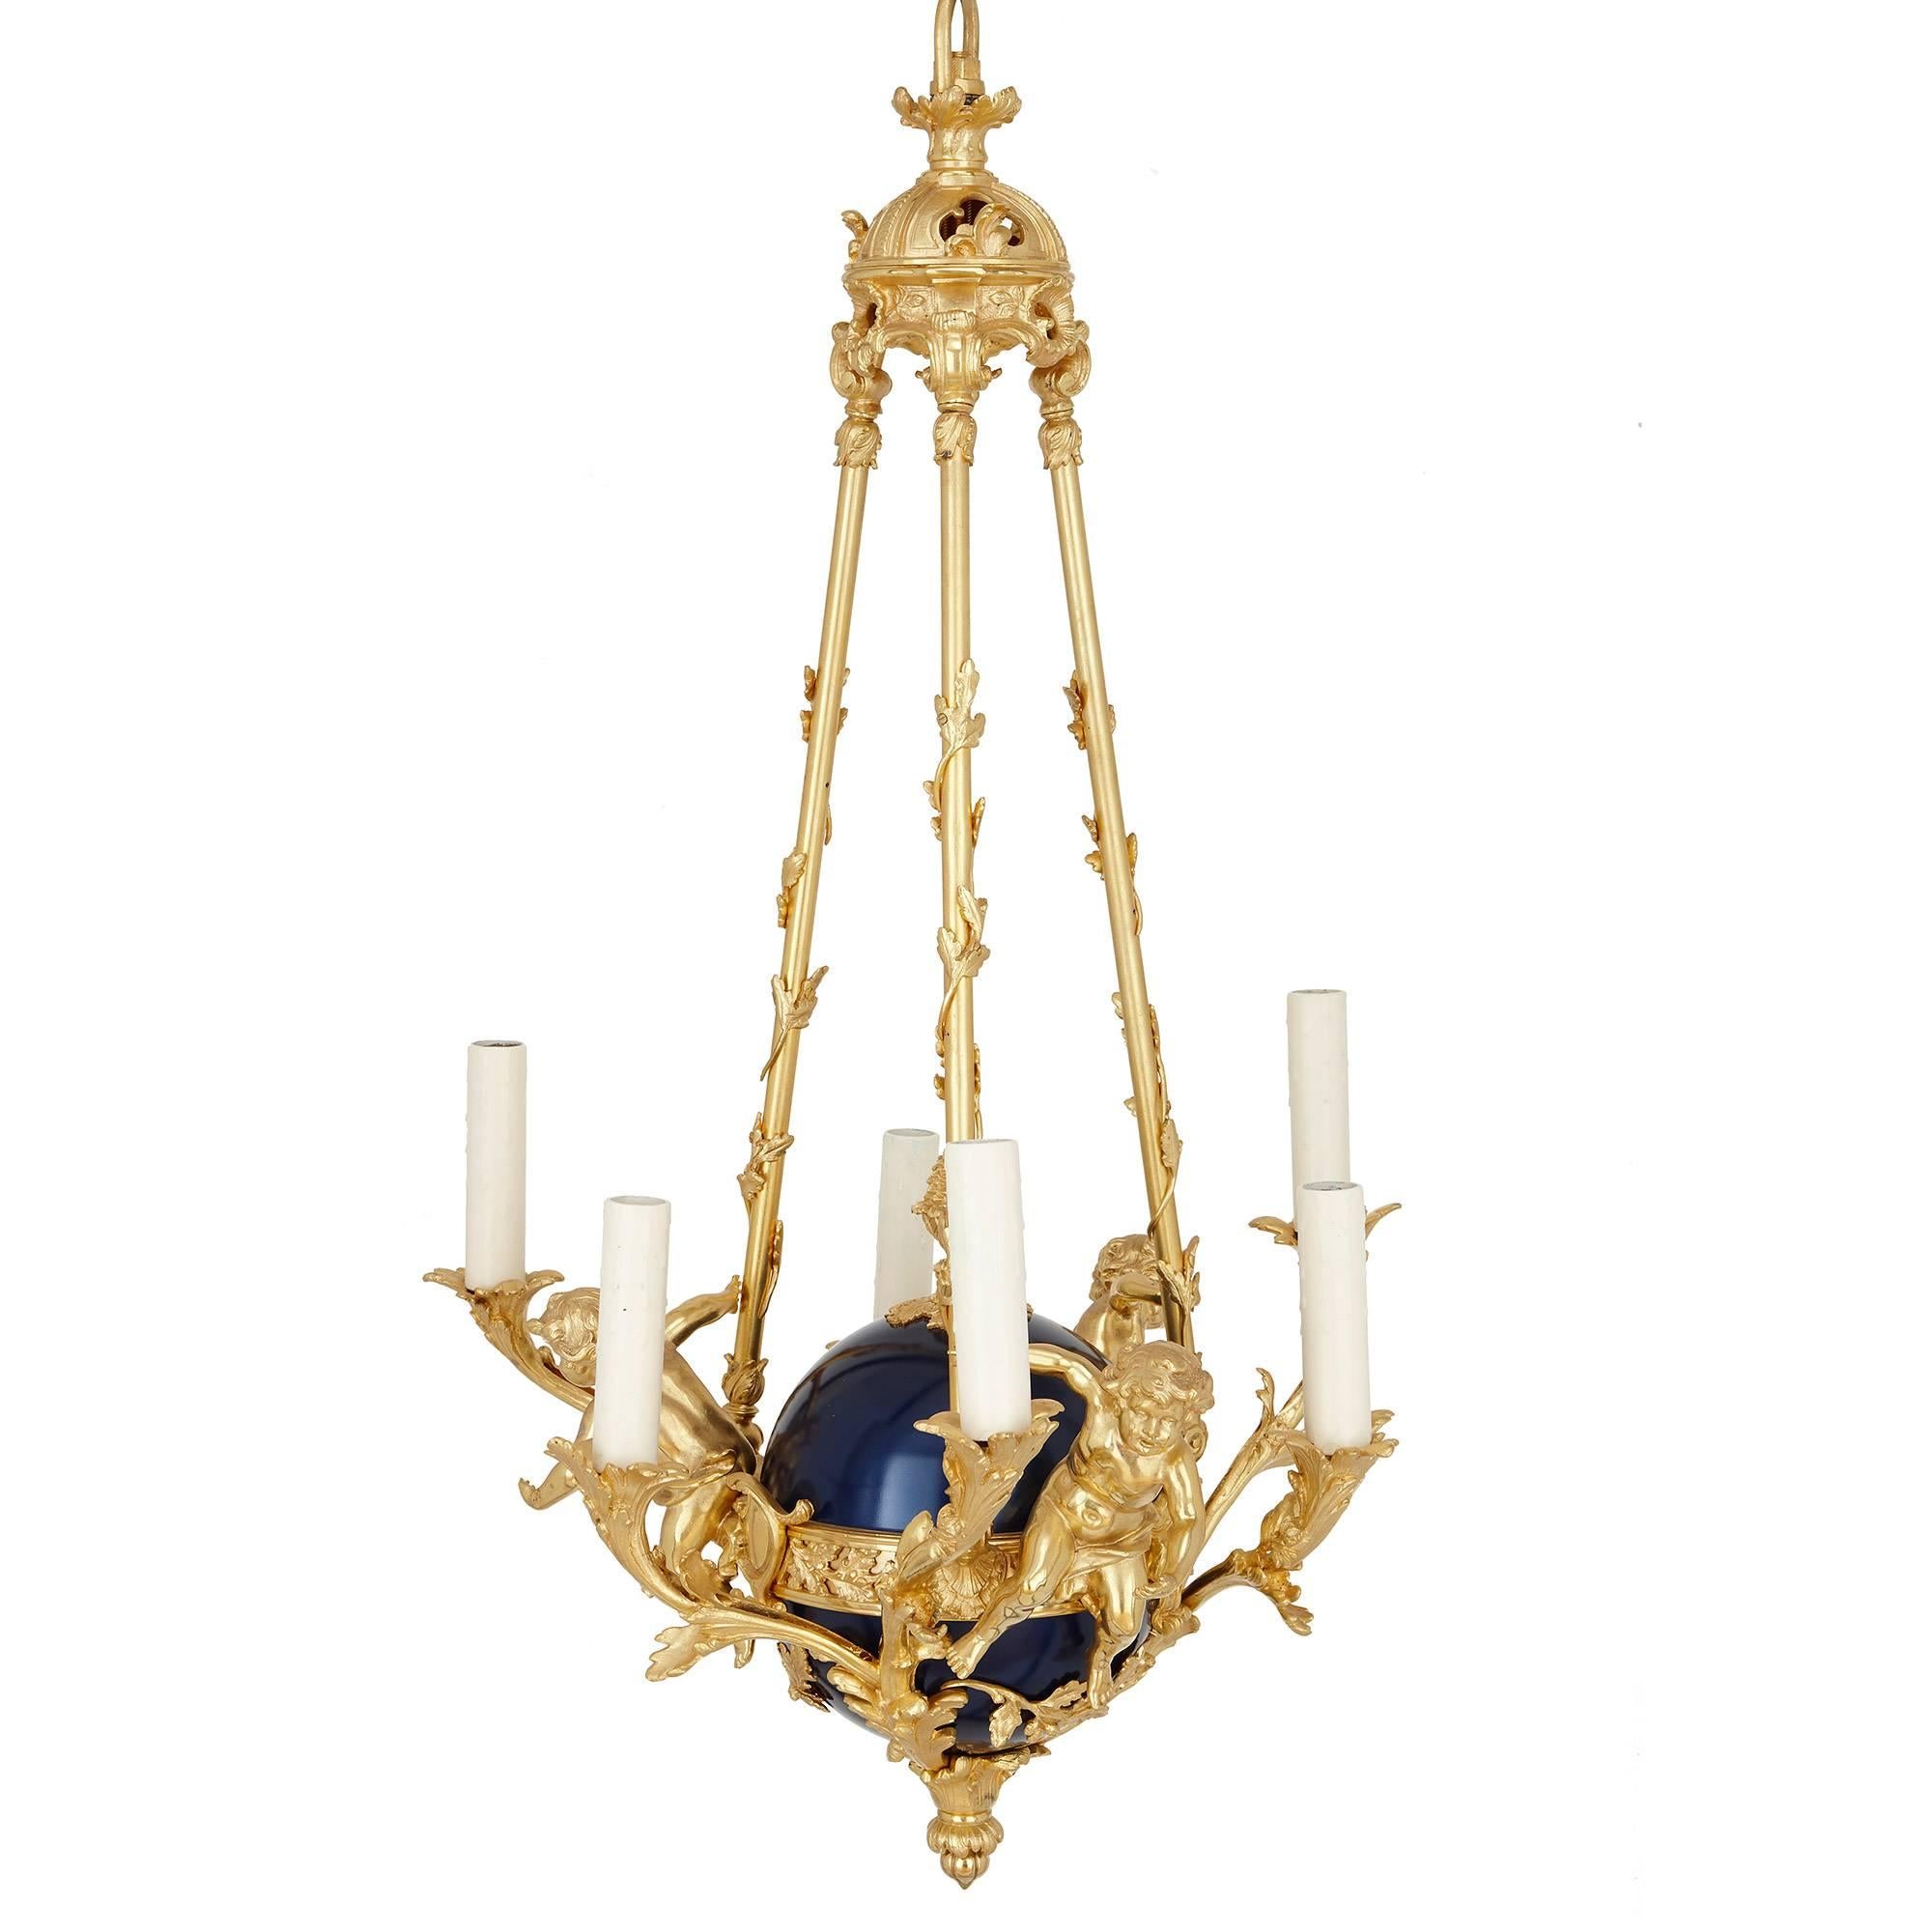 This charming chandelier is crafted in ormolu and tole. The chandelier hangs from an ormolu crown-form support which features rocaille motifs and acanthus leaf form decorations. From the crown extend three ormolu poles, which are entwined with